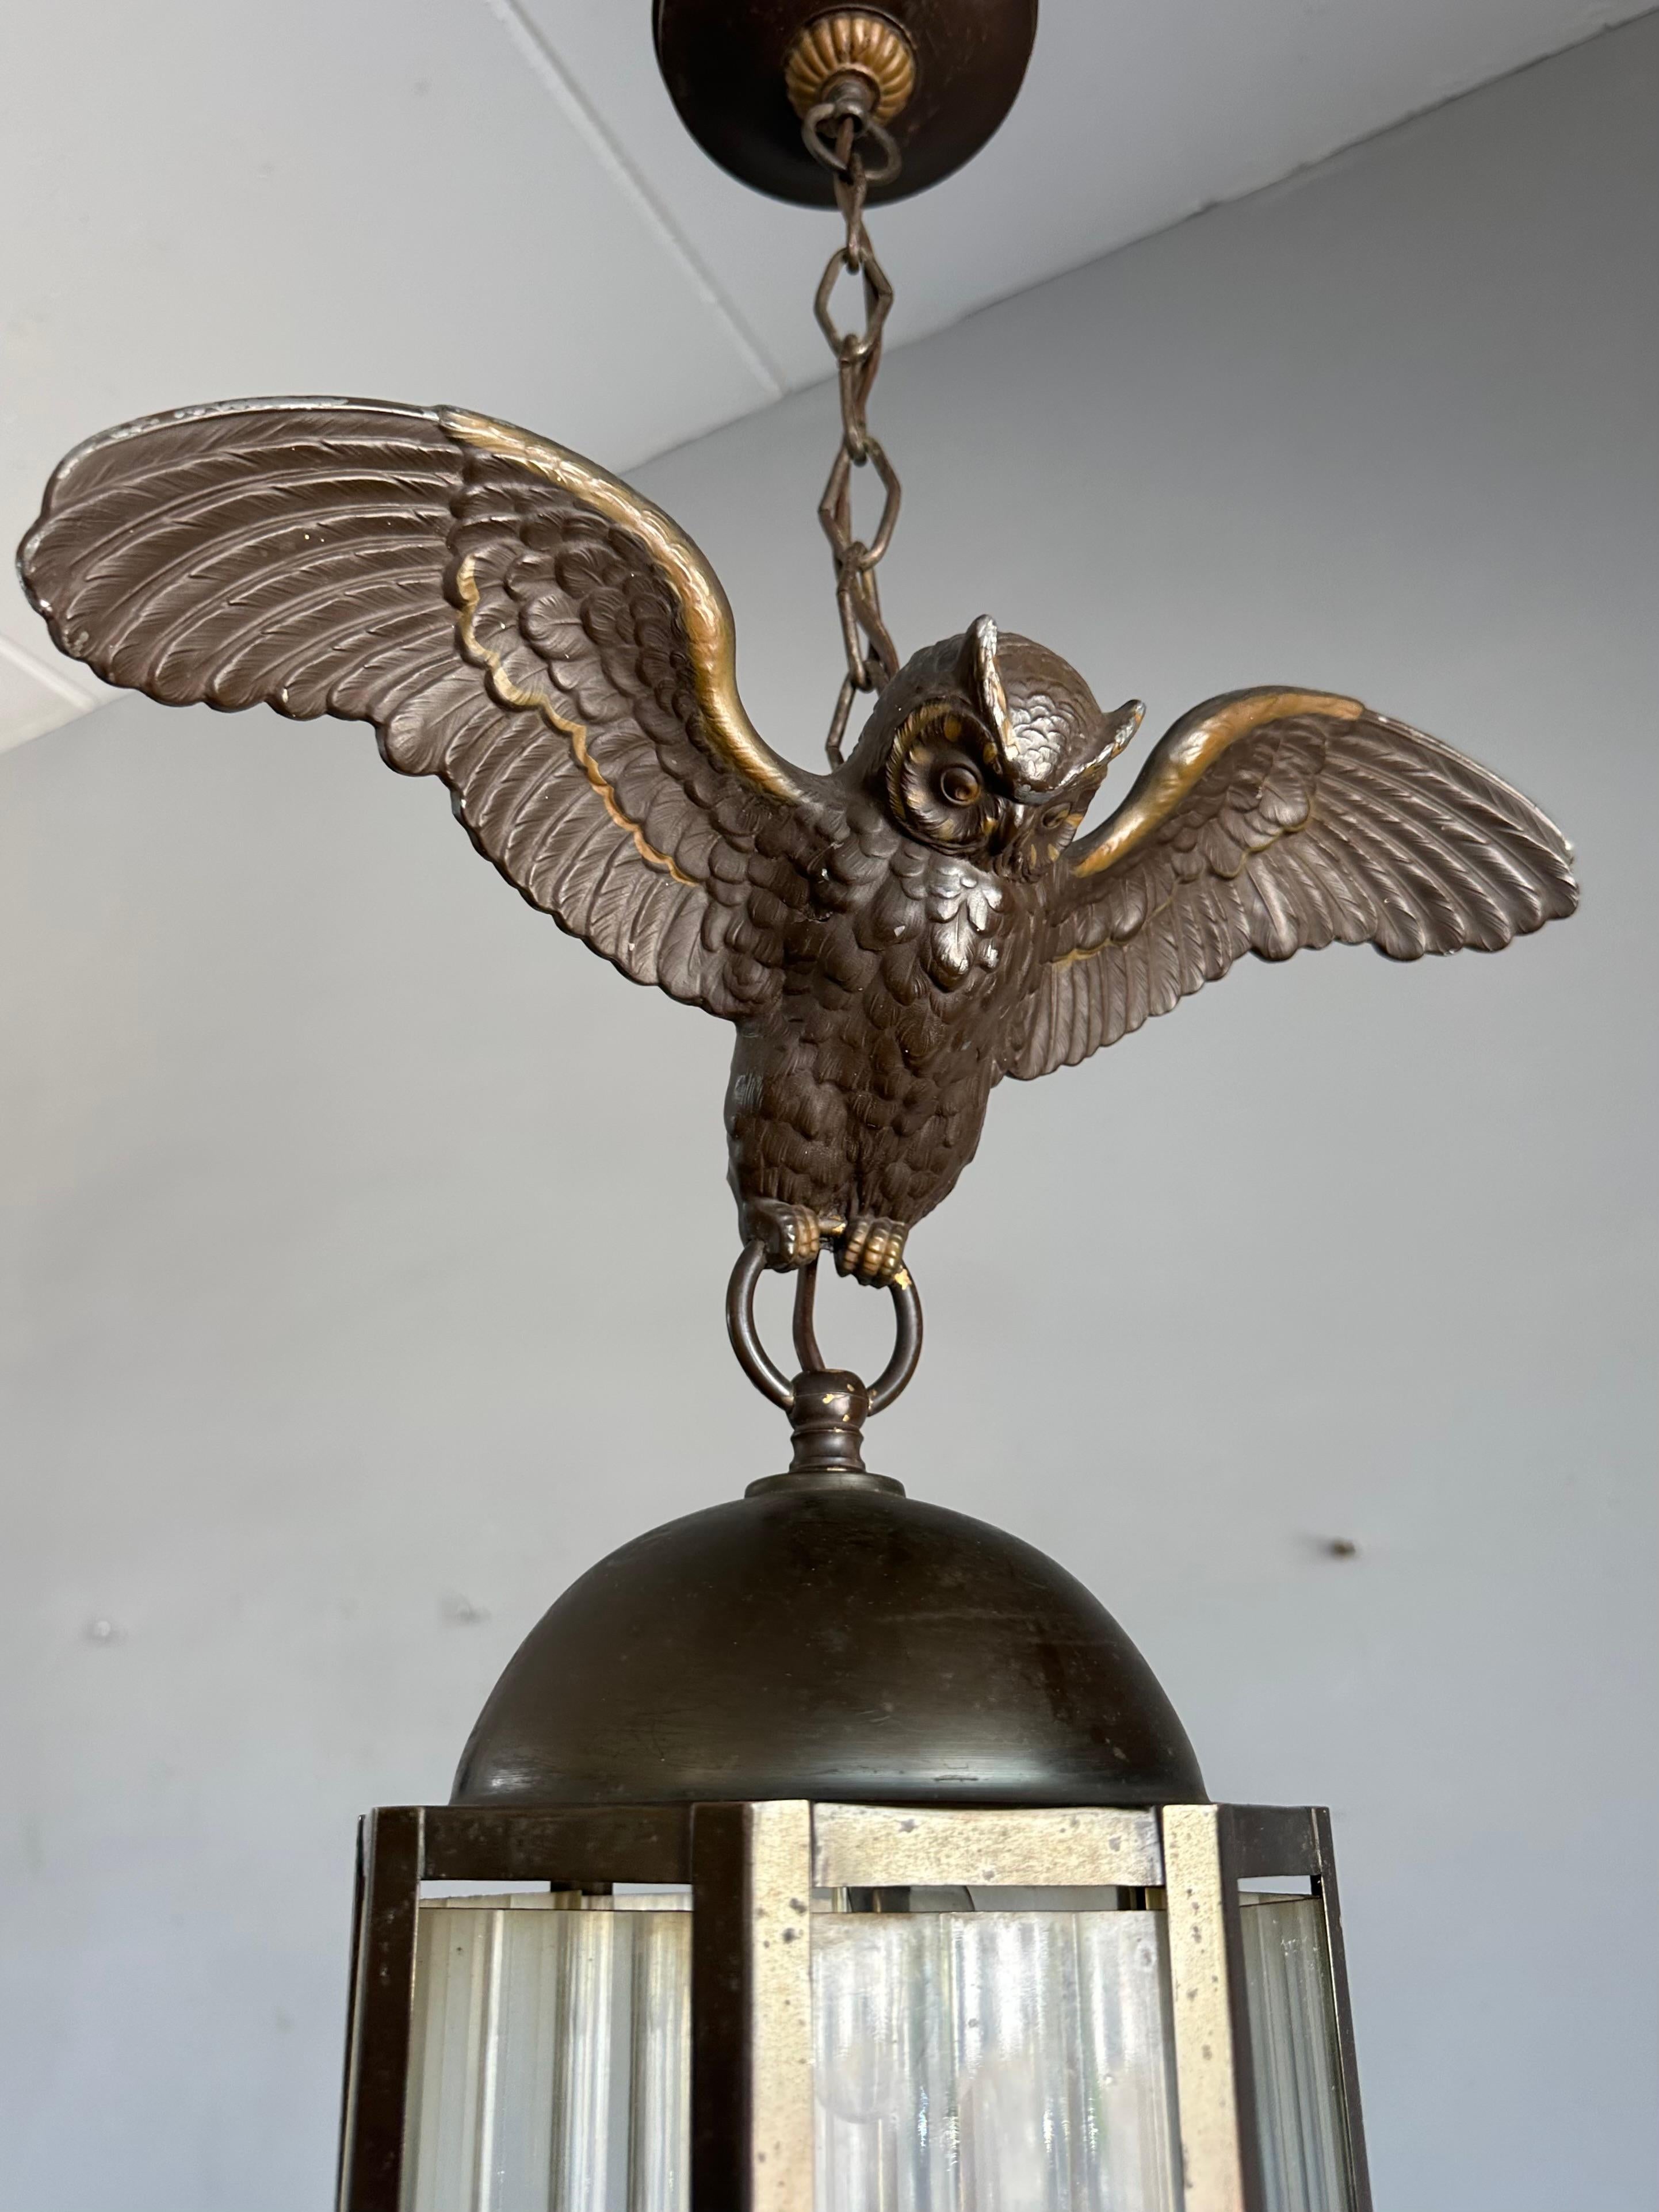 20th Century Arts and Crafts Era Flying Owl Sculpture Pendant Light or Lantern with Cut Glass For Sale